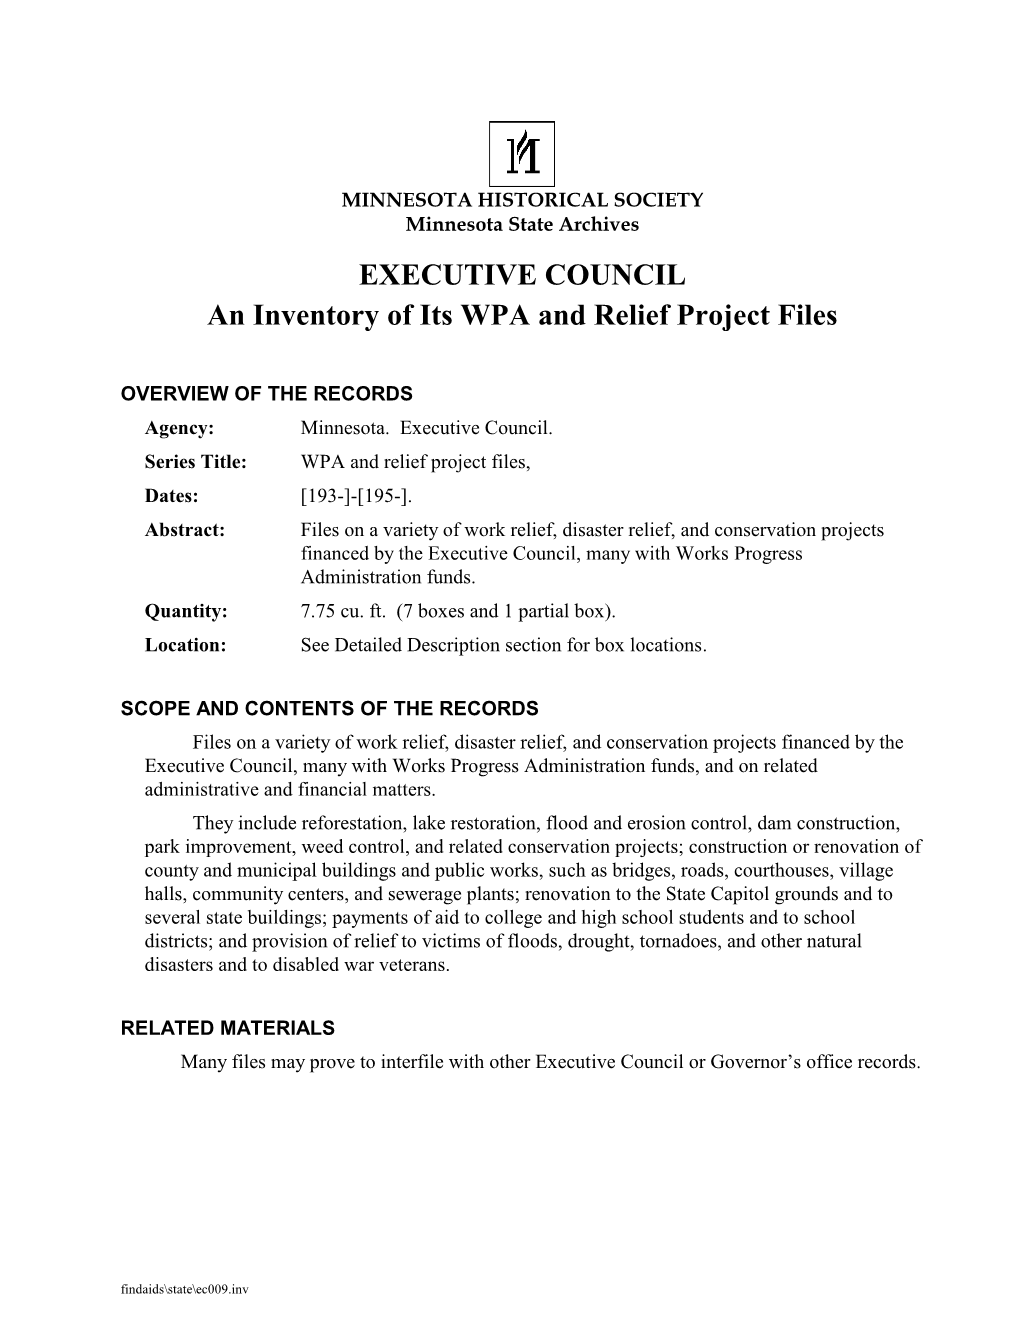 An Inventory of Its WPA and Relief Project Files